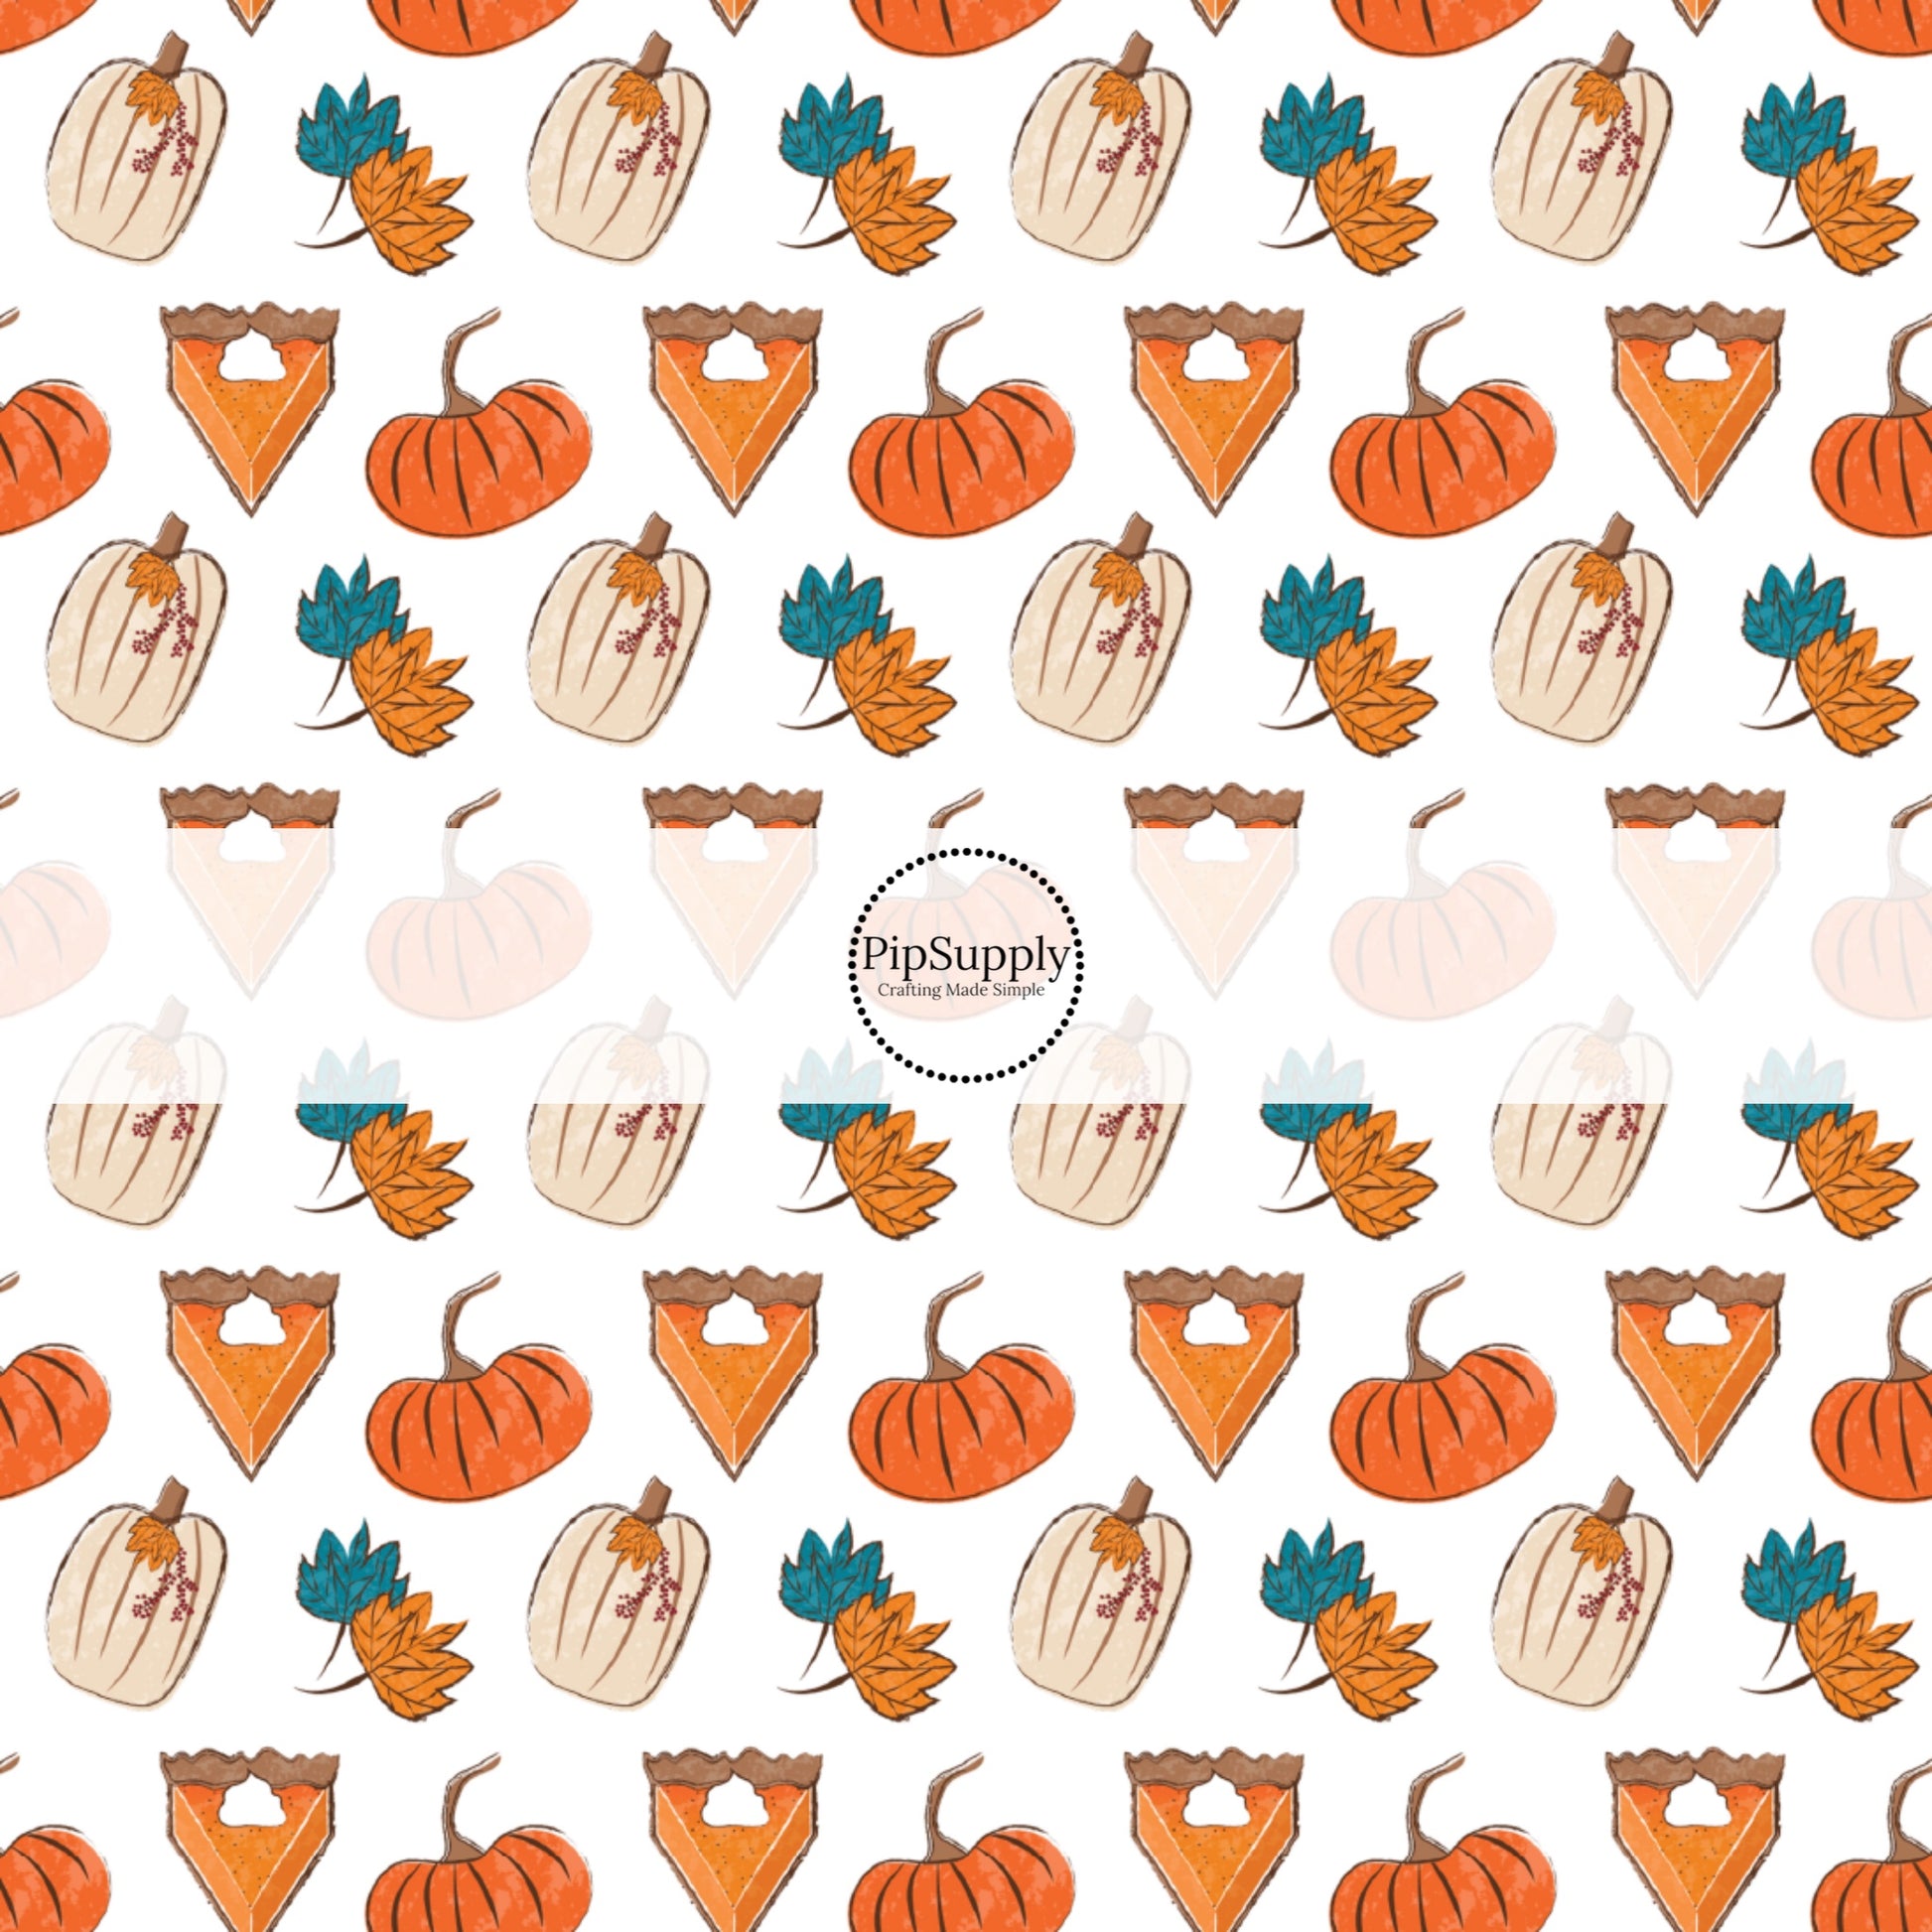 These fall pumpkin themed cream fabric by the yard features pumpkin pie slices surrounded by leaves and pumpkins. This fun fall themed fabric can be used for all your sewing and crafting needs! 